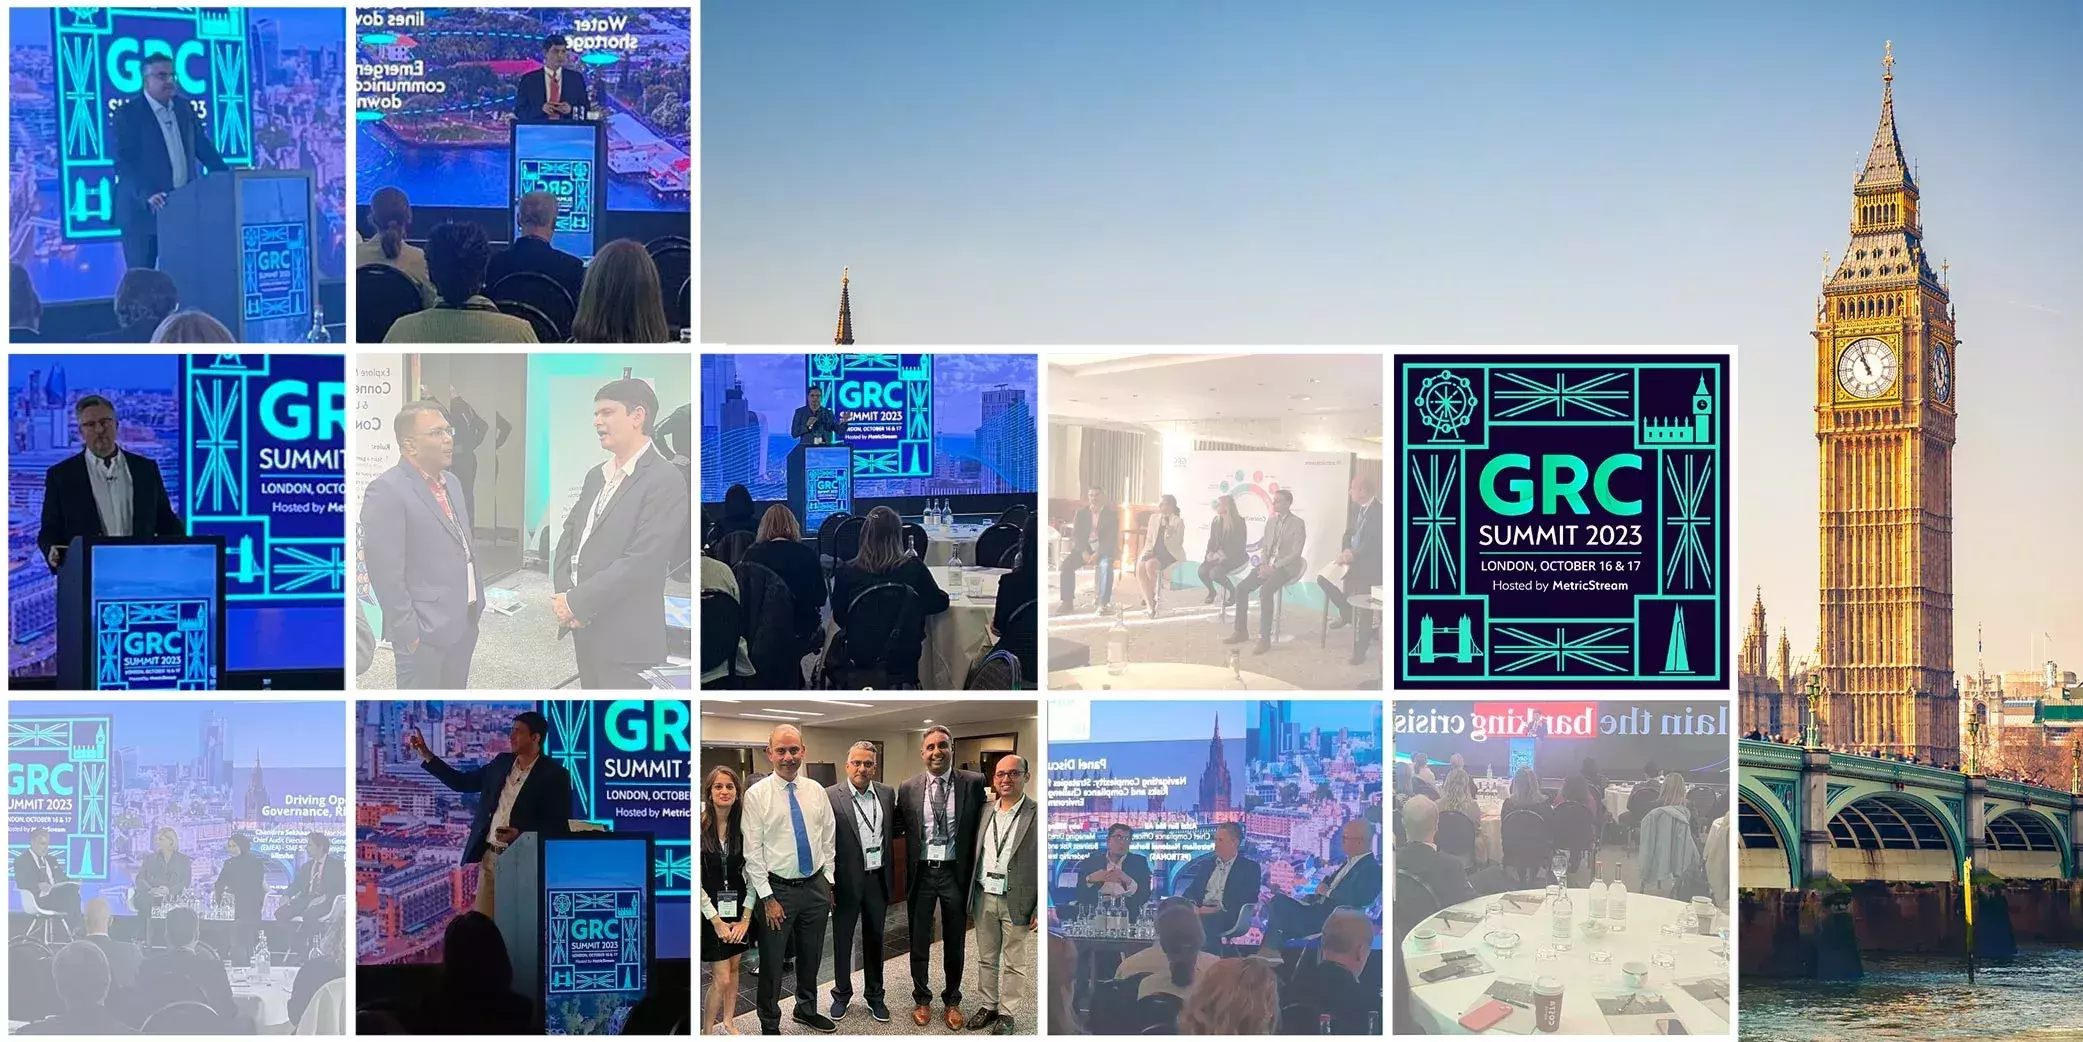 GRC Trends in the UK Capital: Key Themes at the 2023 London GRC Summit 